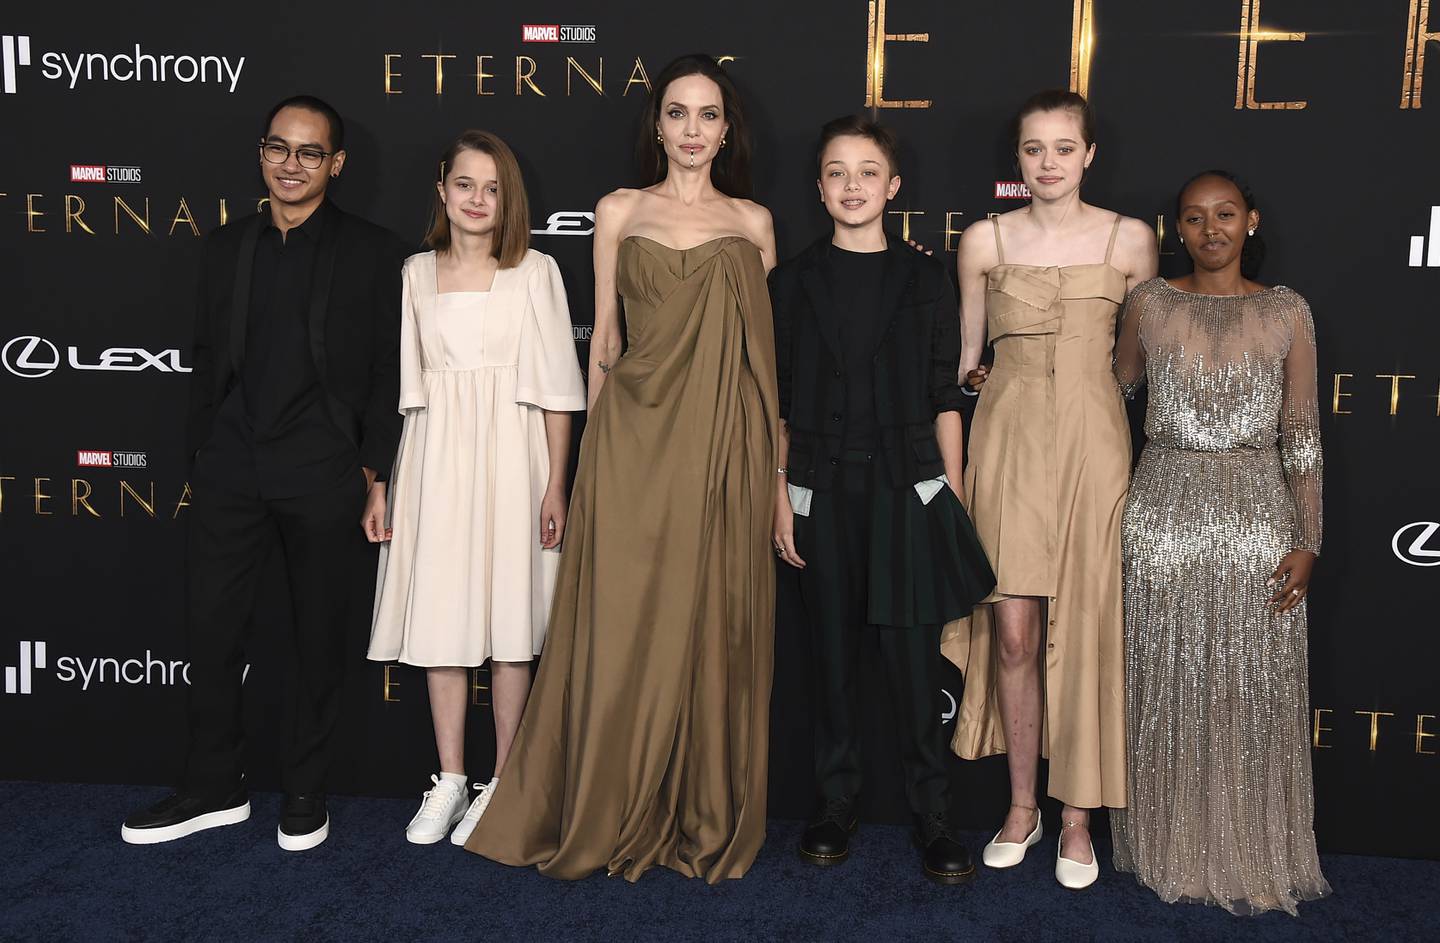 From left, Maddox Jolie-Pitt, Vivienne Jolie-Pitt, Angelina Jolie, Knox Jolie-Pitt, Shiloh Jolie-Pitt, and Zahara Jolie-Pitt arrive at the Los Angeles premiere of 'Eternals' on October 18. AP Photo